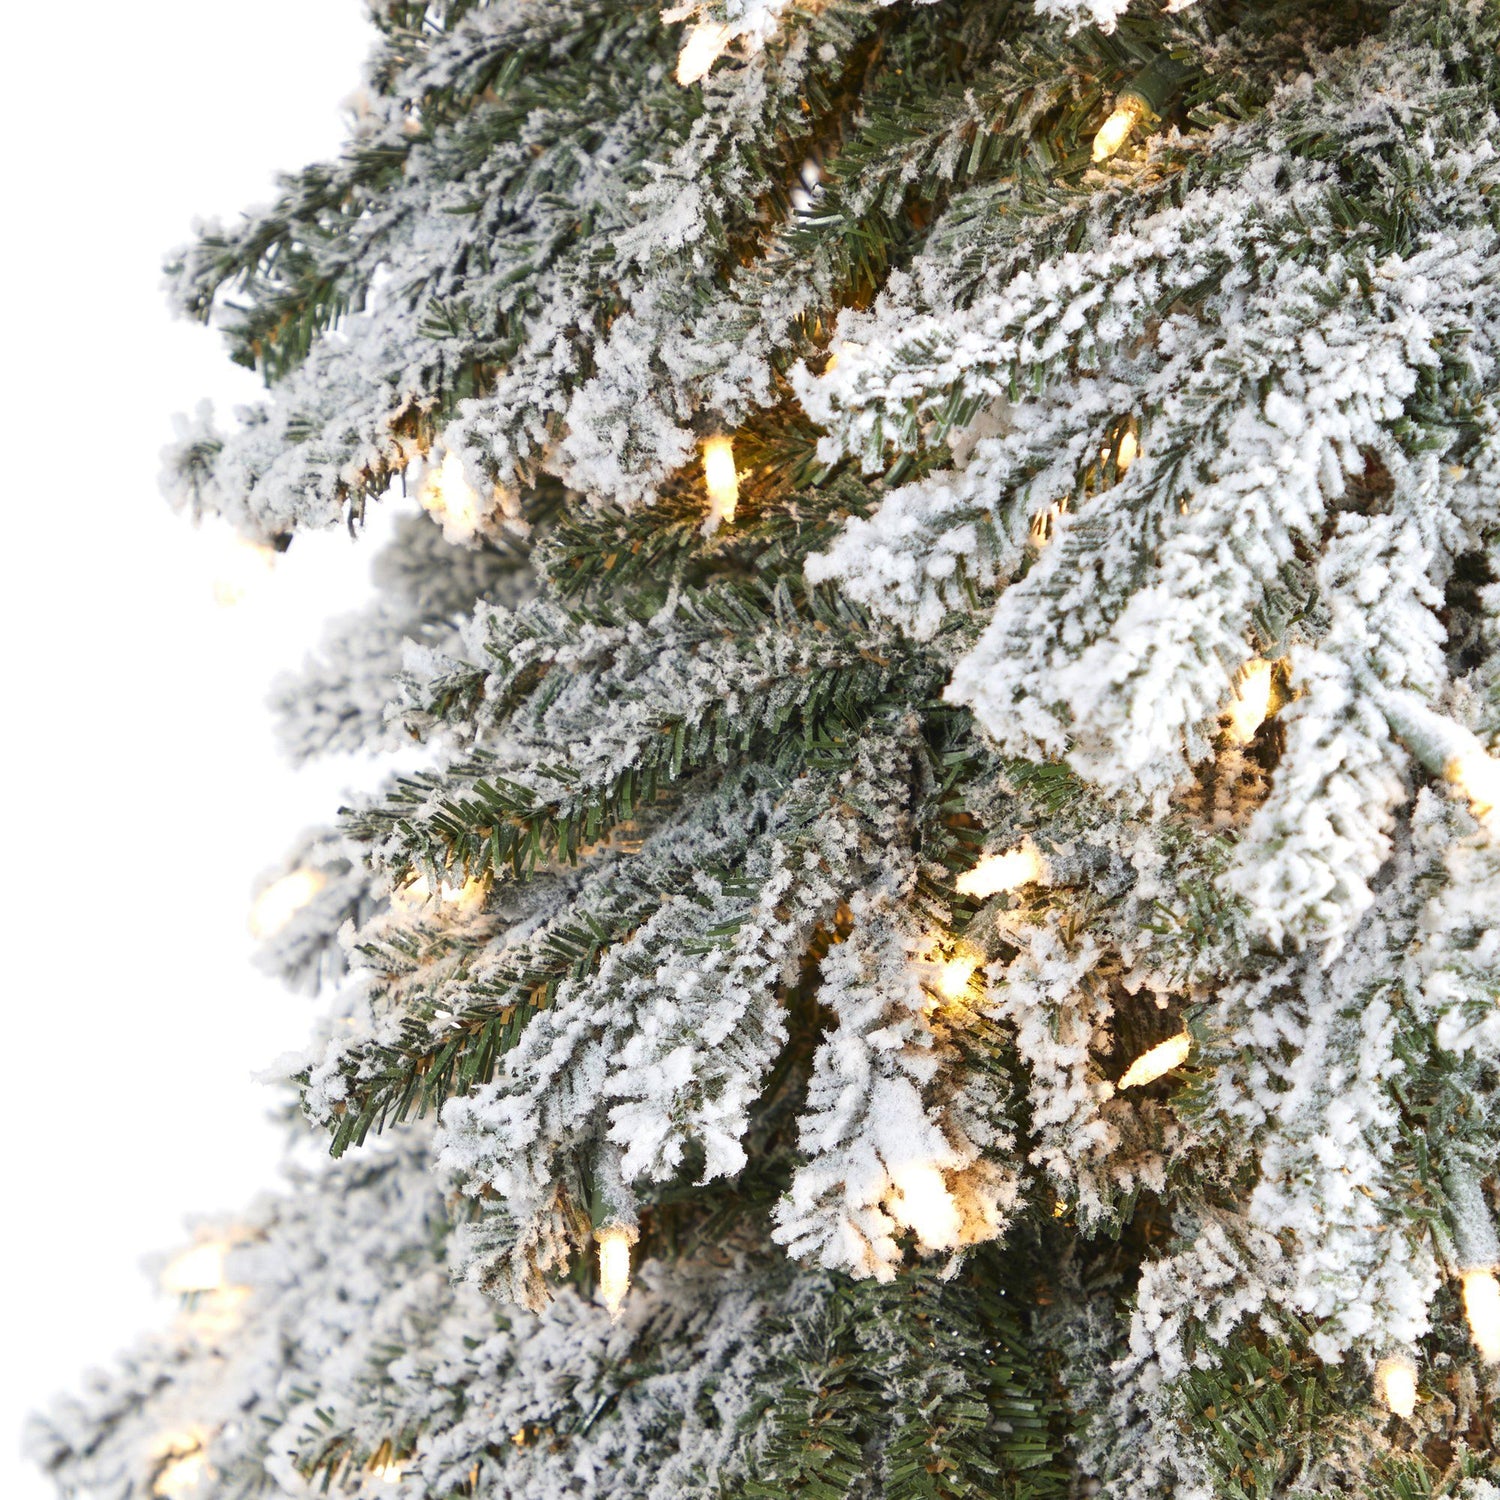 9’ Flocked Grand Alpine Artificial Christmas Tree with 600 Lights and 1183 Branches on Natural Trunk